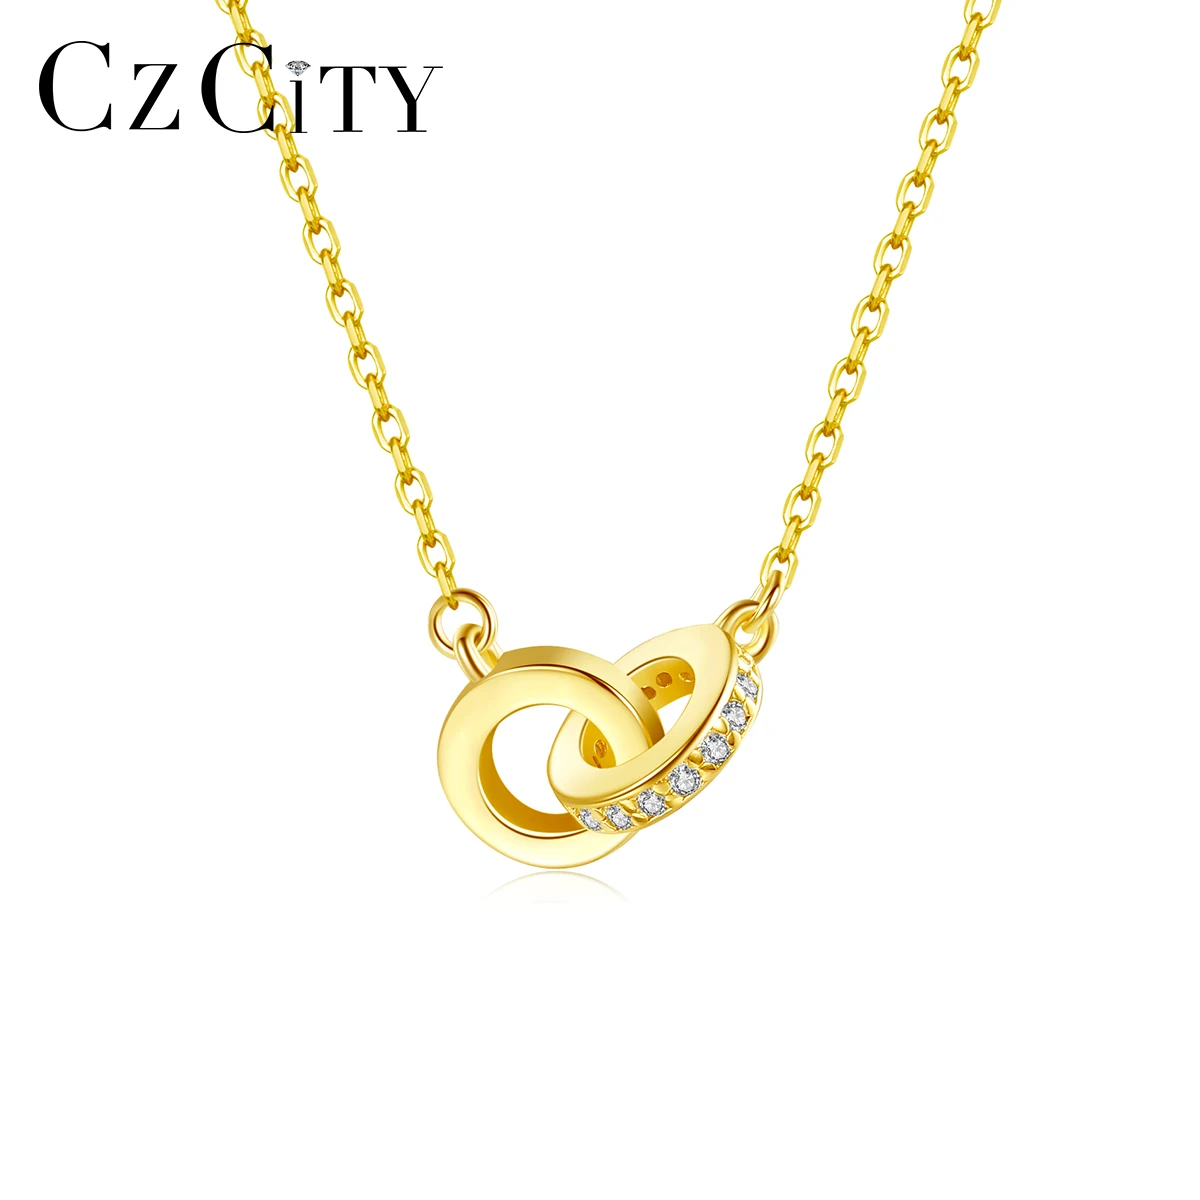 

CZCITY 925 Gold Plated Chain Pendant 14K Cute Charm Elegant Designer Fashion Jewelry Trending Woman Necklace